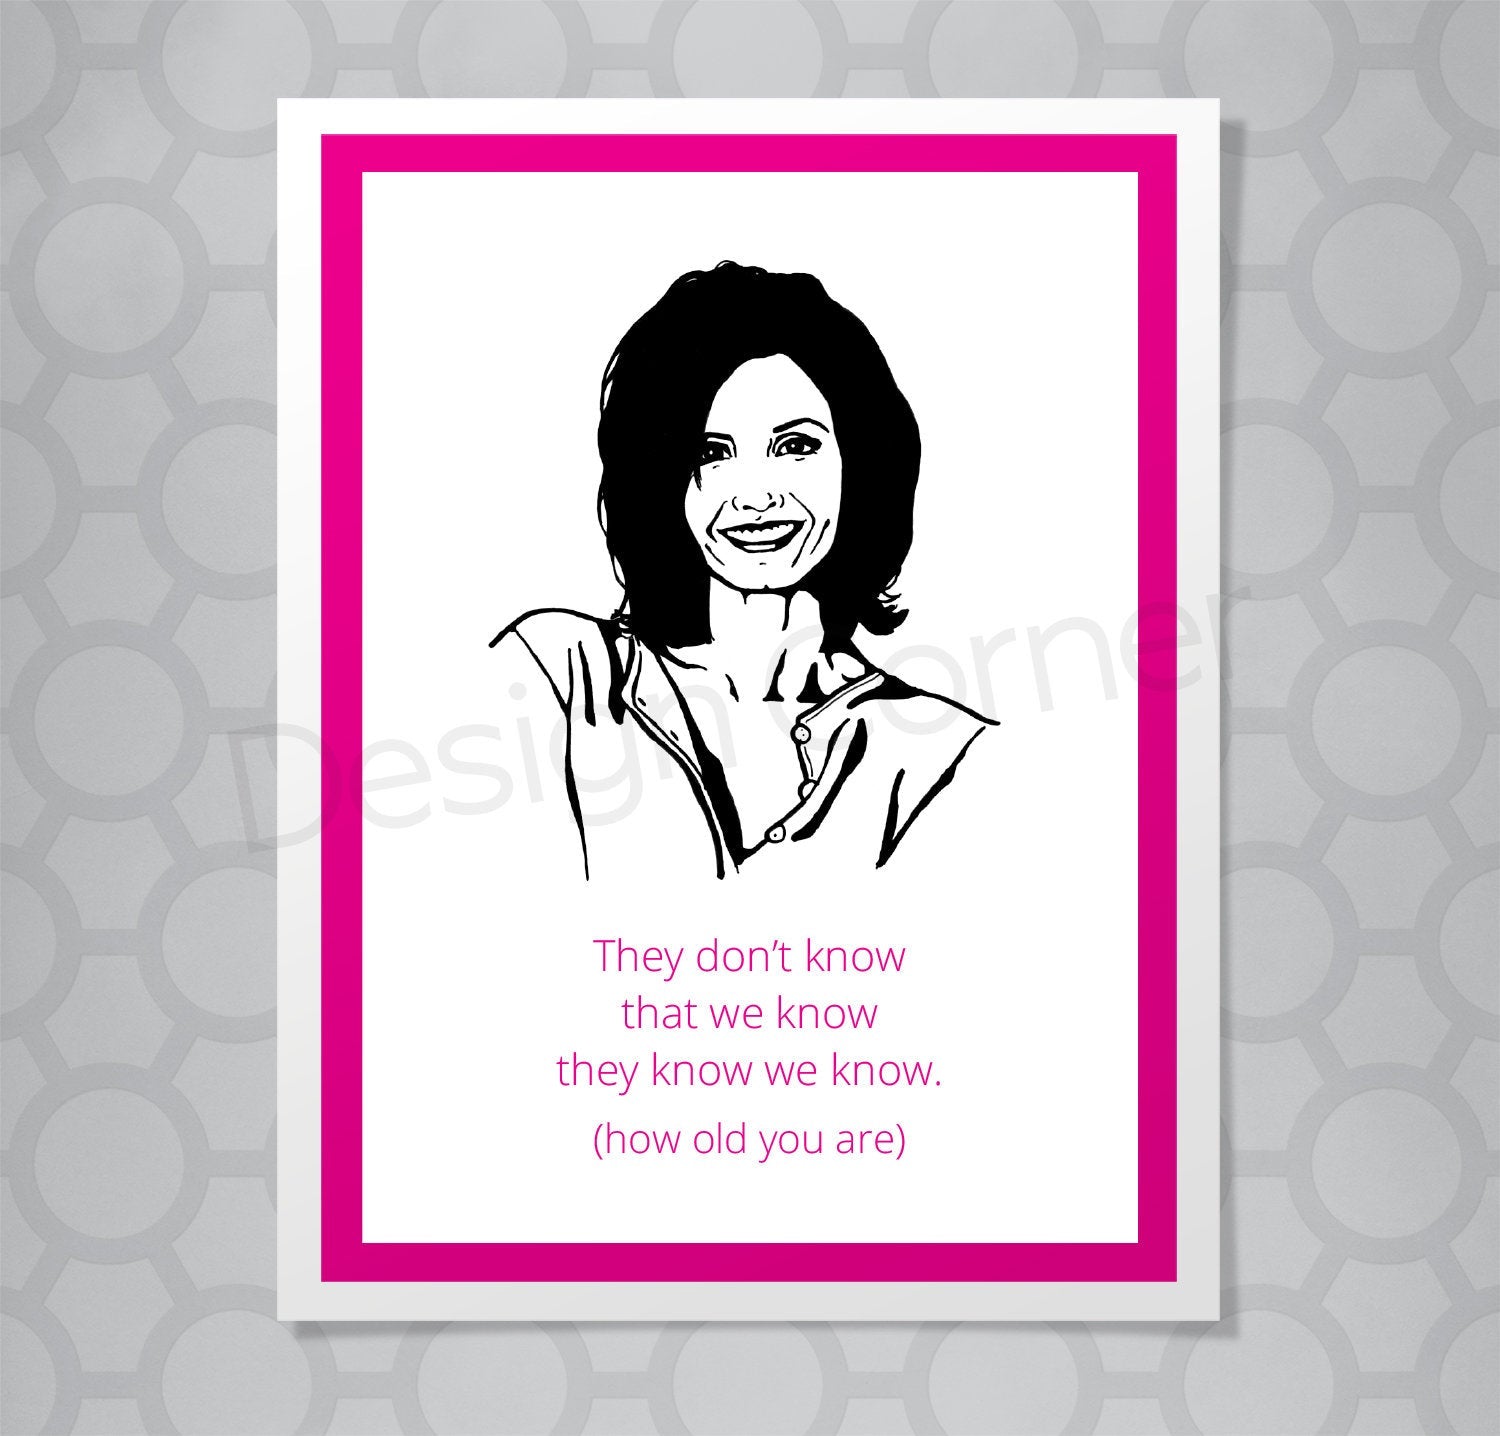 Greeting card with illustration of Friends Monica. Caption says "They don't know that we know they know we know. (how old you are)"